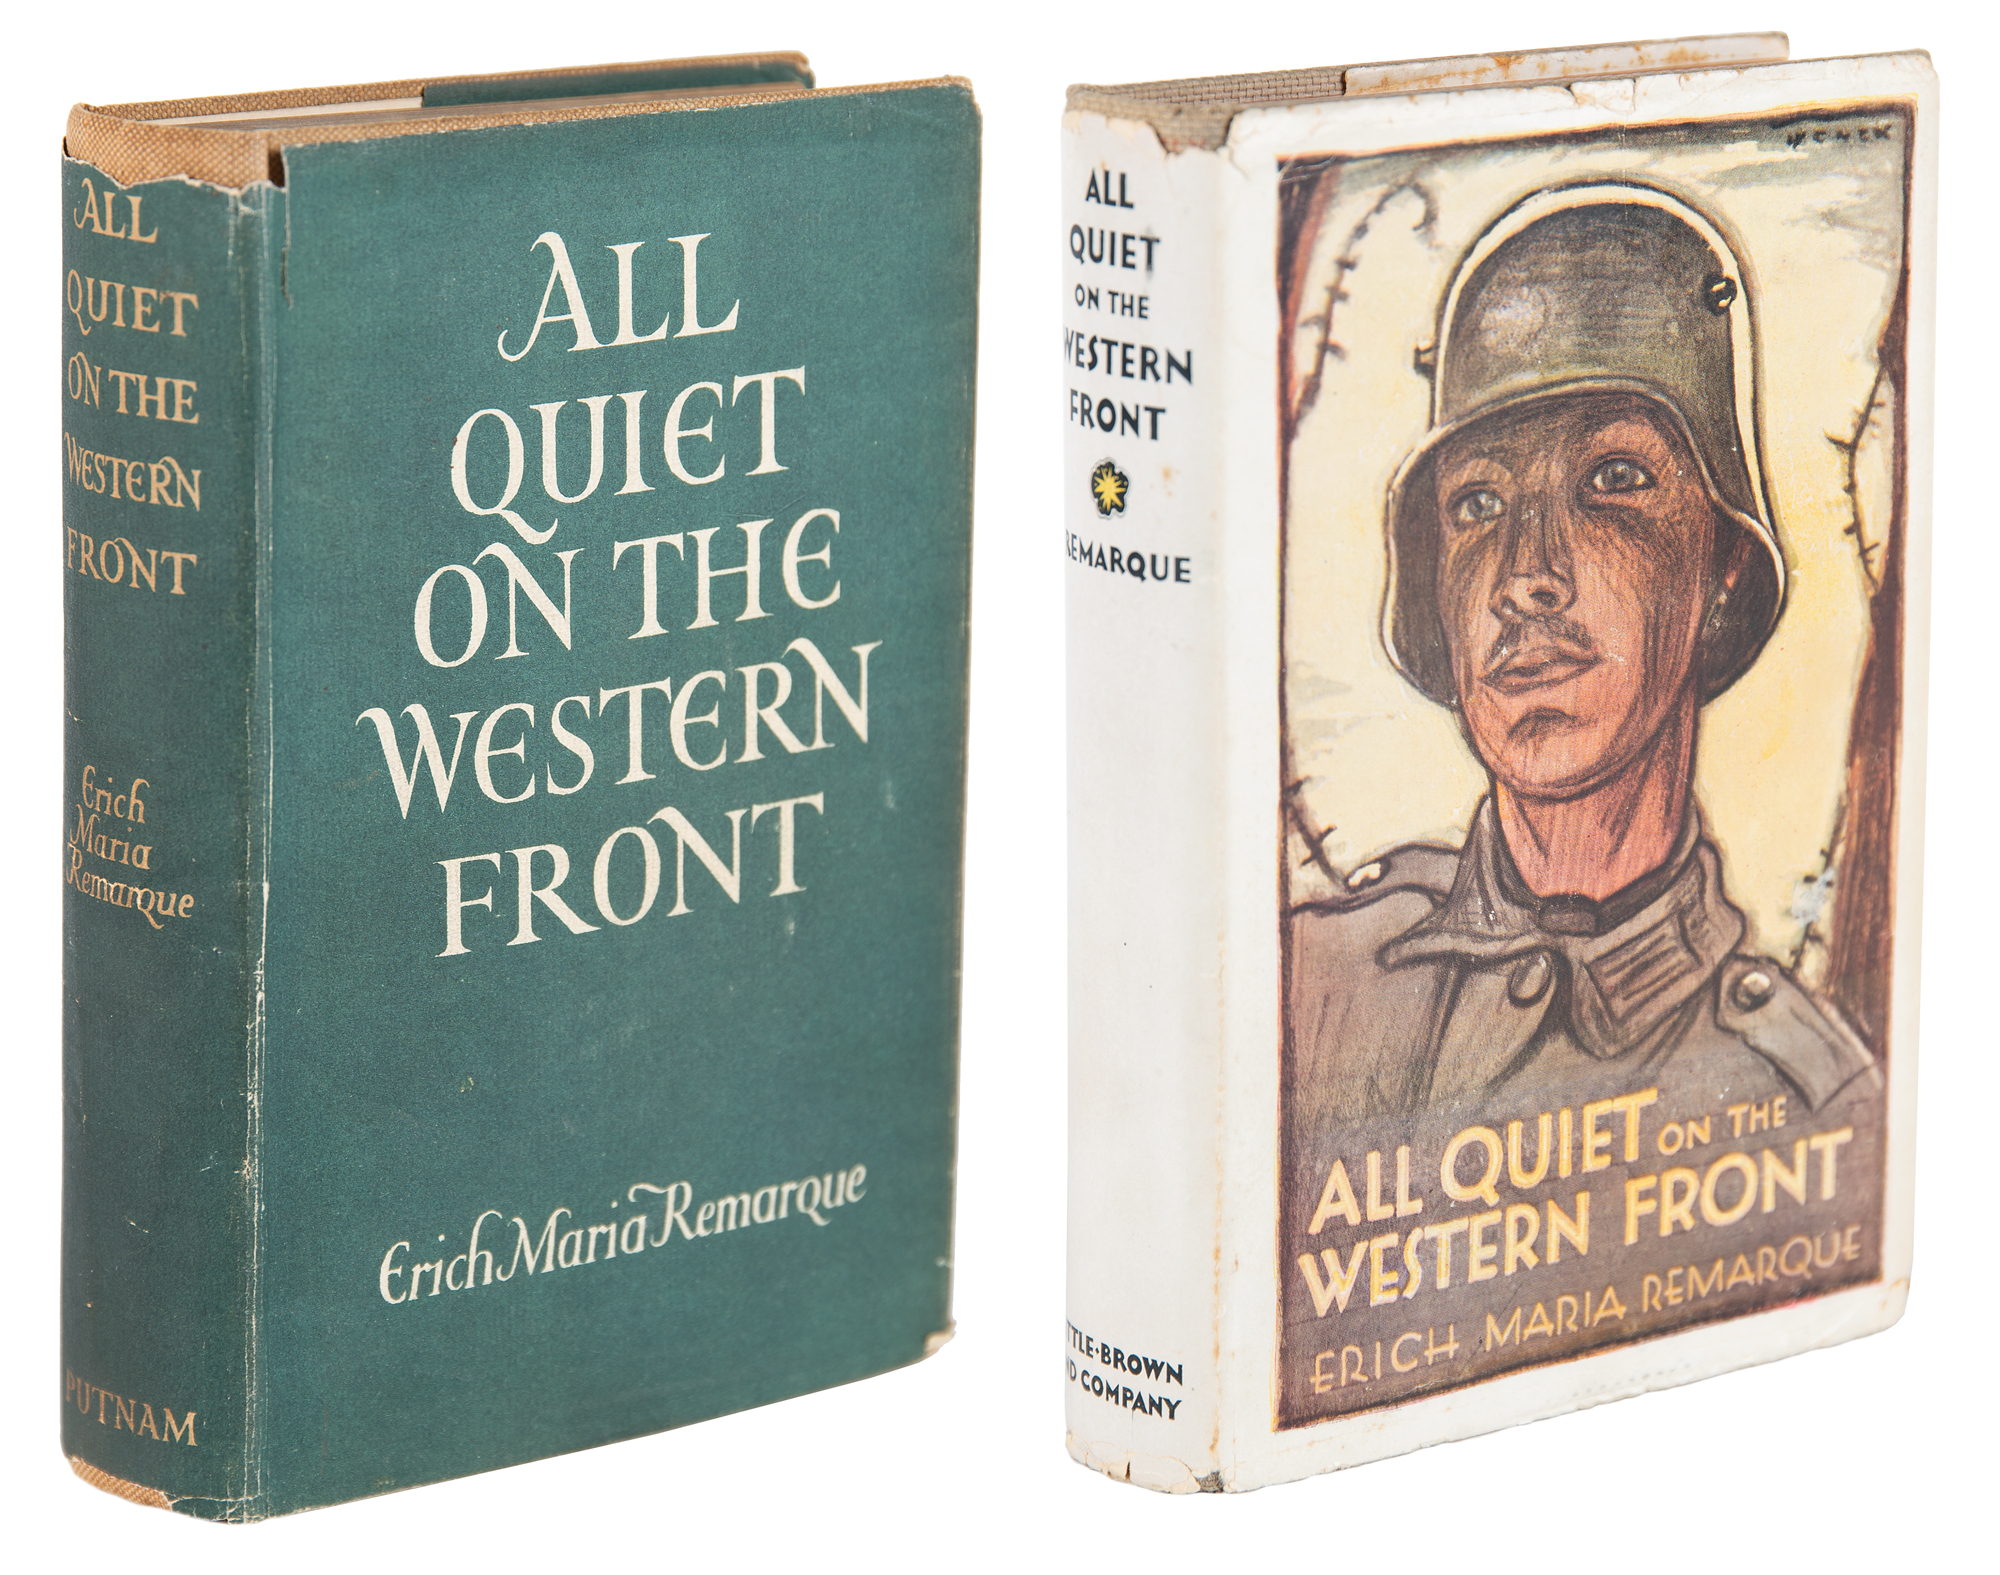 All Quiet on the Western Front by Erich Maria Remarque (1929) first edition  book